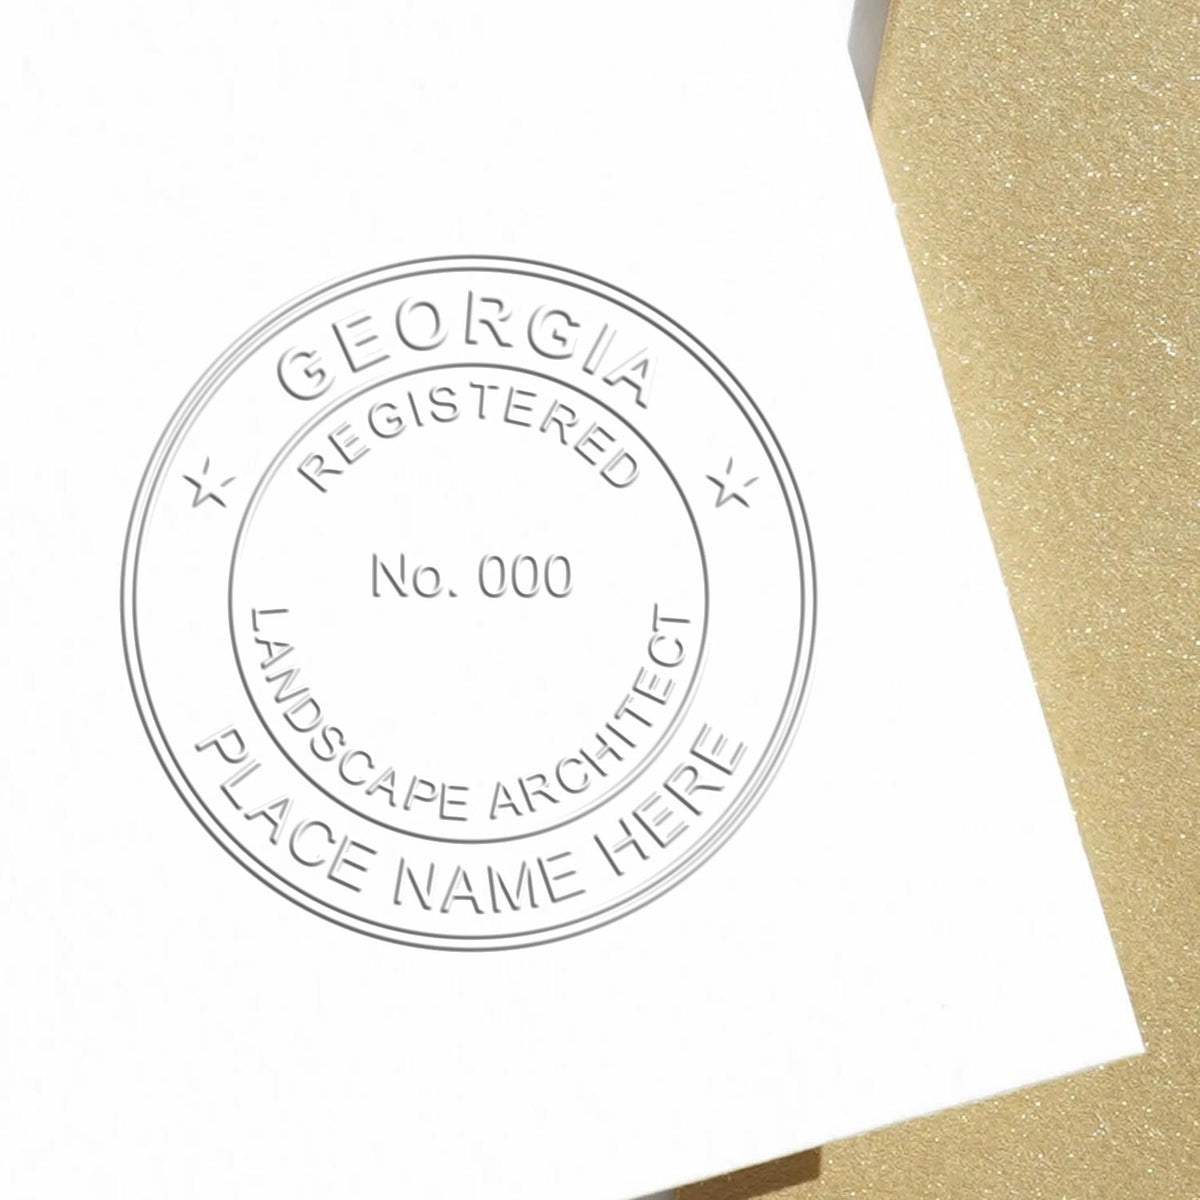 A stamped imprint of the Gift Georgia Landscape Architect Seal in this stylish lifestyle photo, setting the tone for a unique and personalized product.